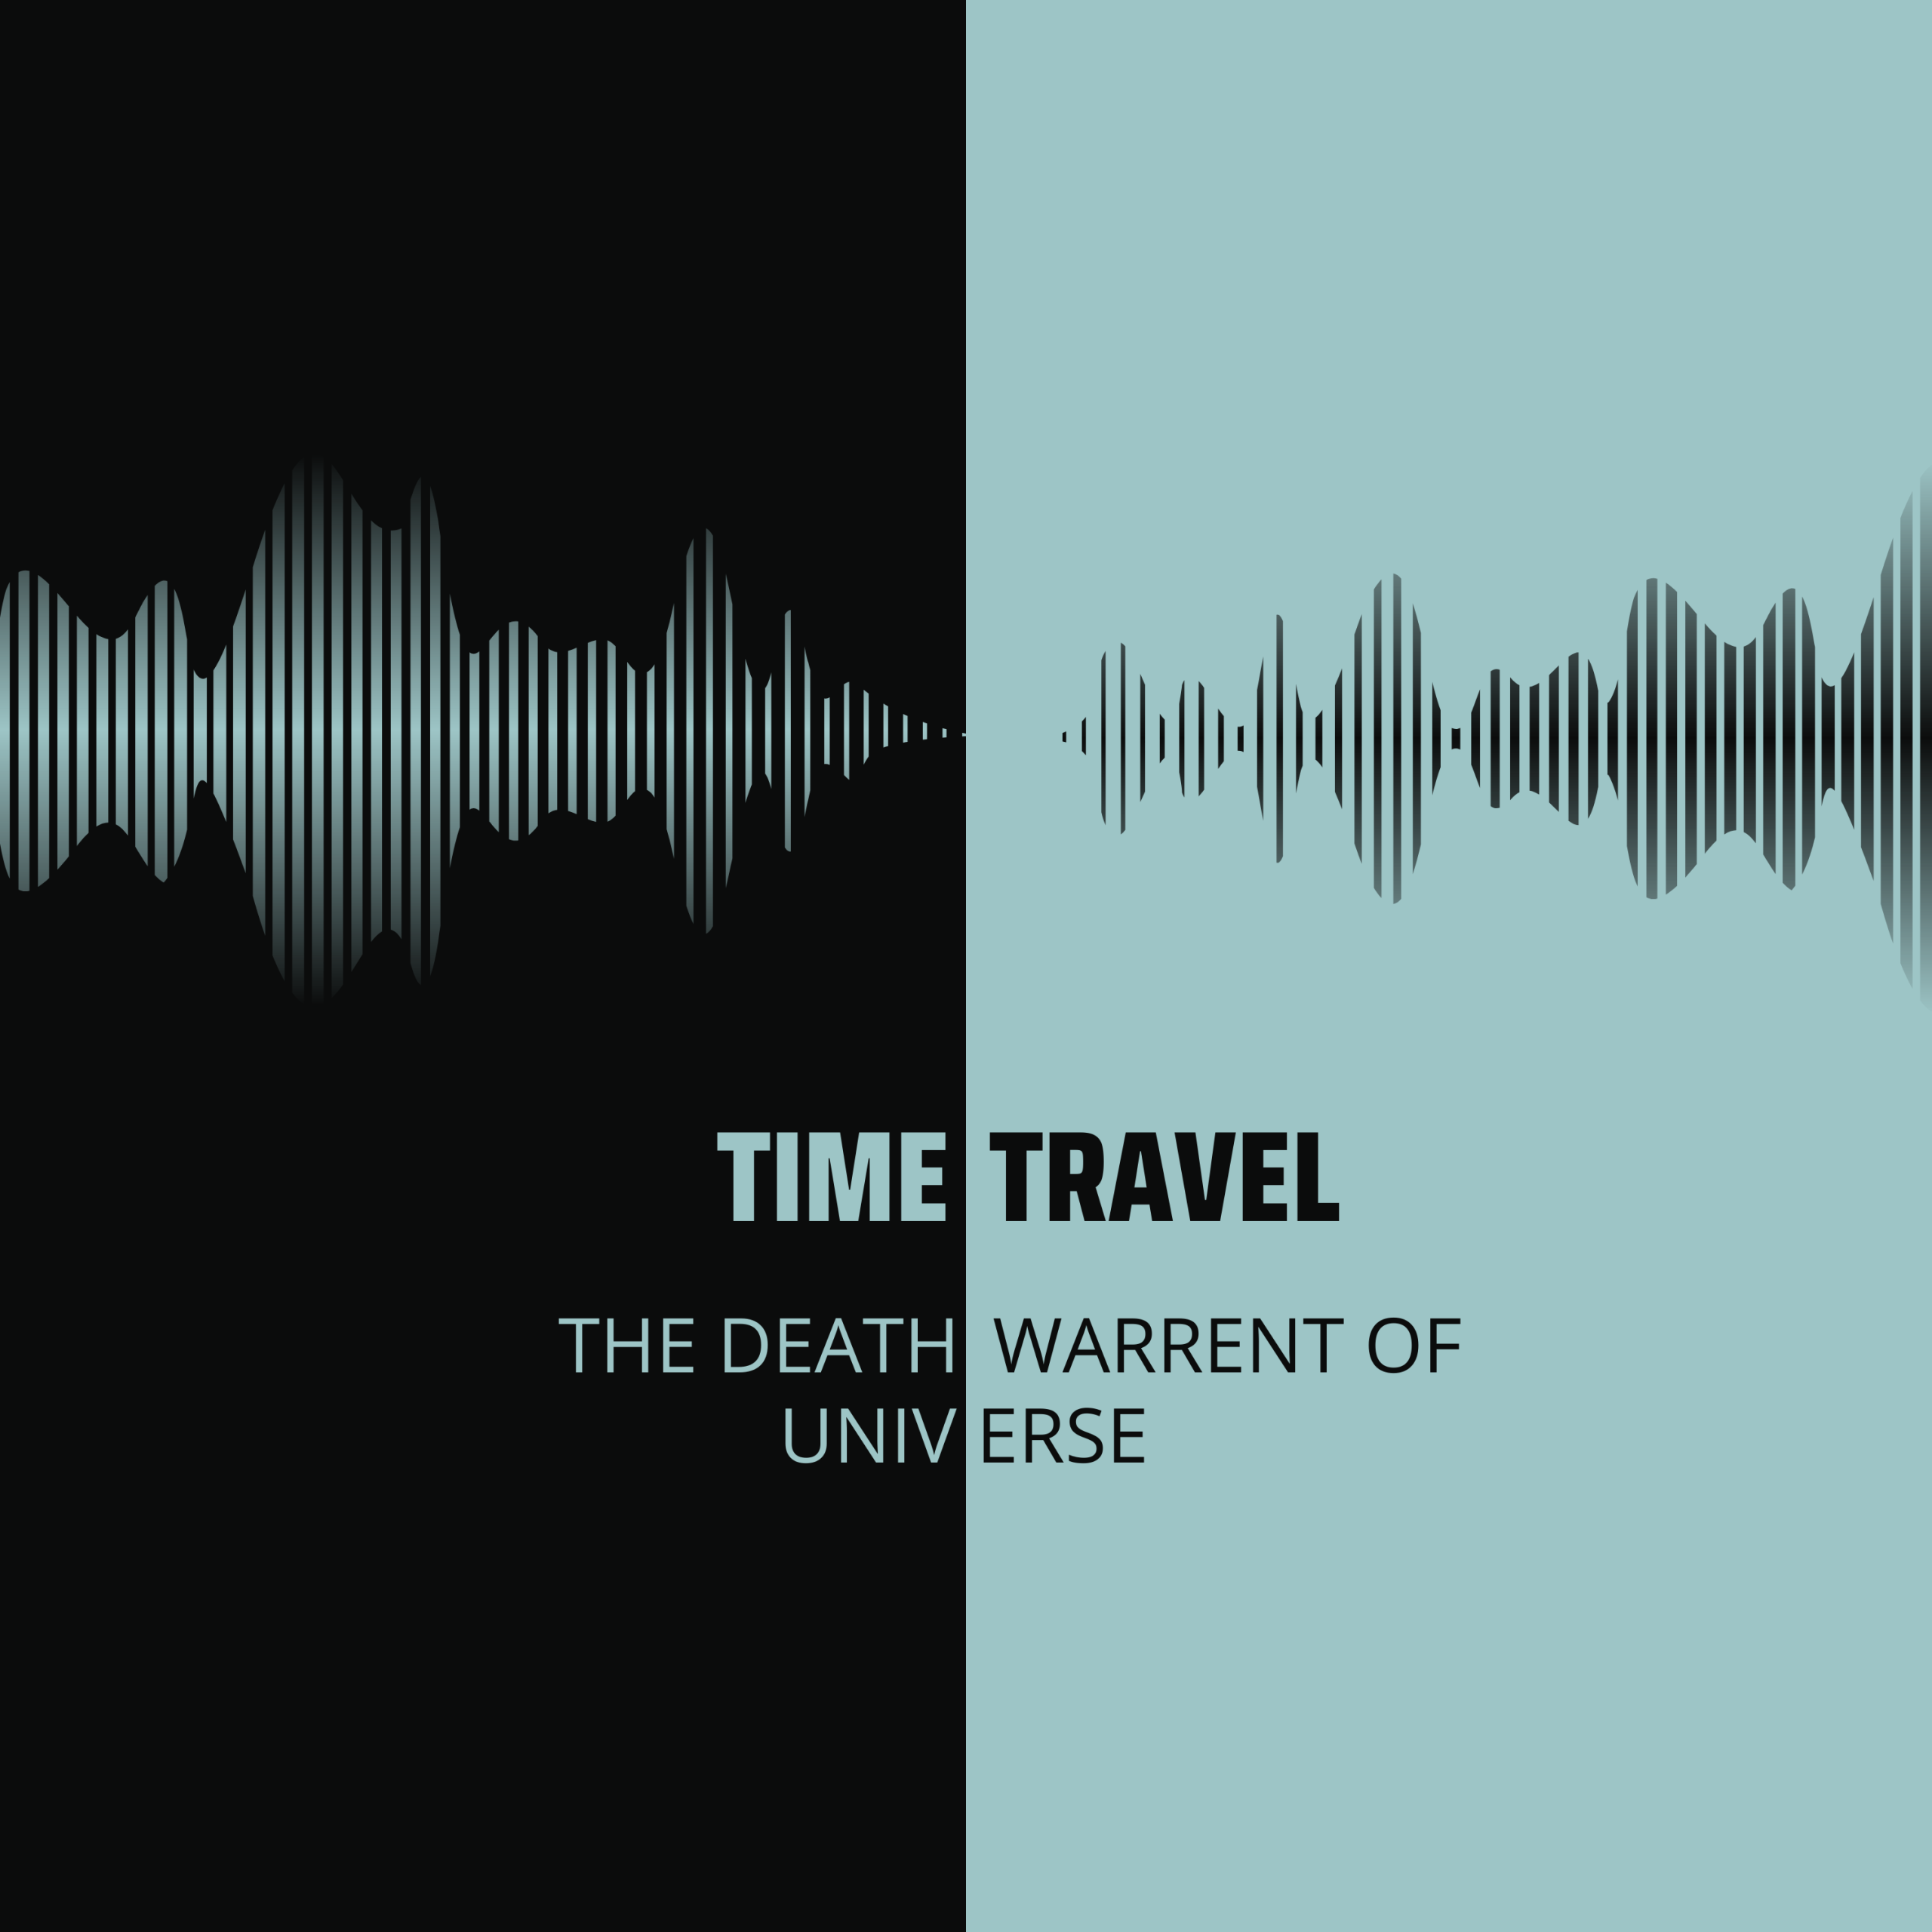 Podcast: Time travel and physics the ultimate death warrant of the universe